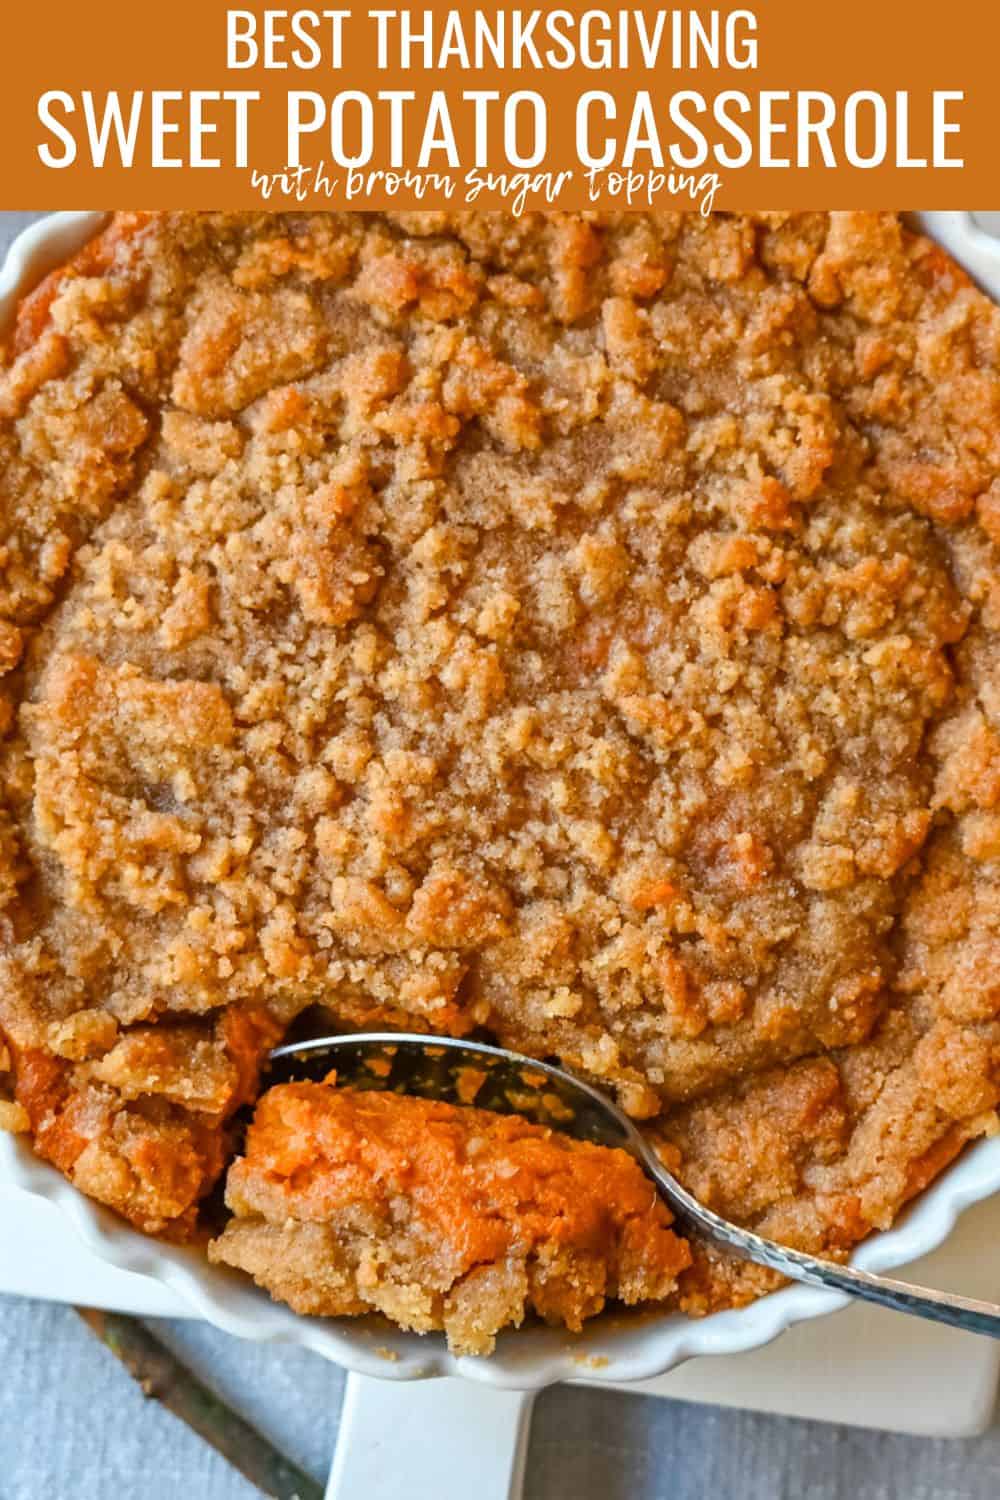 Best Sweet Potato Casserole. This creamy sweet potato casserole with a brown sugar topping is one of the most popular Thanksgiving side dish recipes. Everyone loves it! It is so easy and can be made ahead of time. It is the perfect holiday side dish recipe.